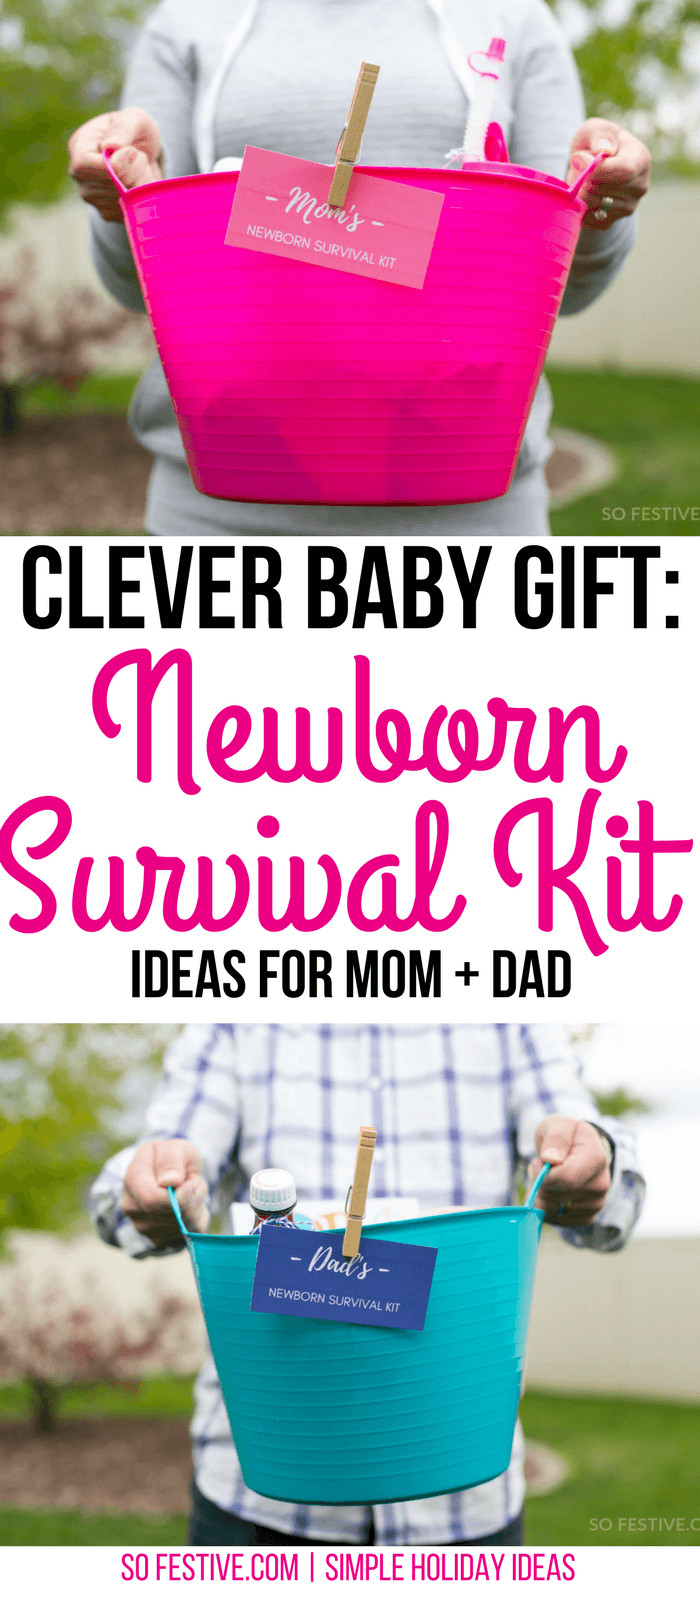 Www Ideas For A Gift For Family For New Baby
 How to Make a Newborn Survival Kit for a Baby Shower Gift